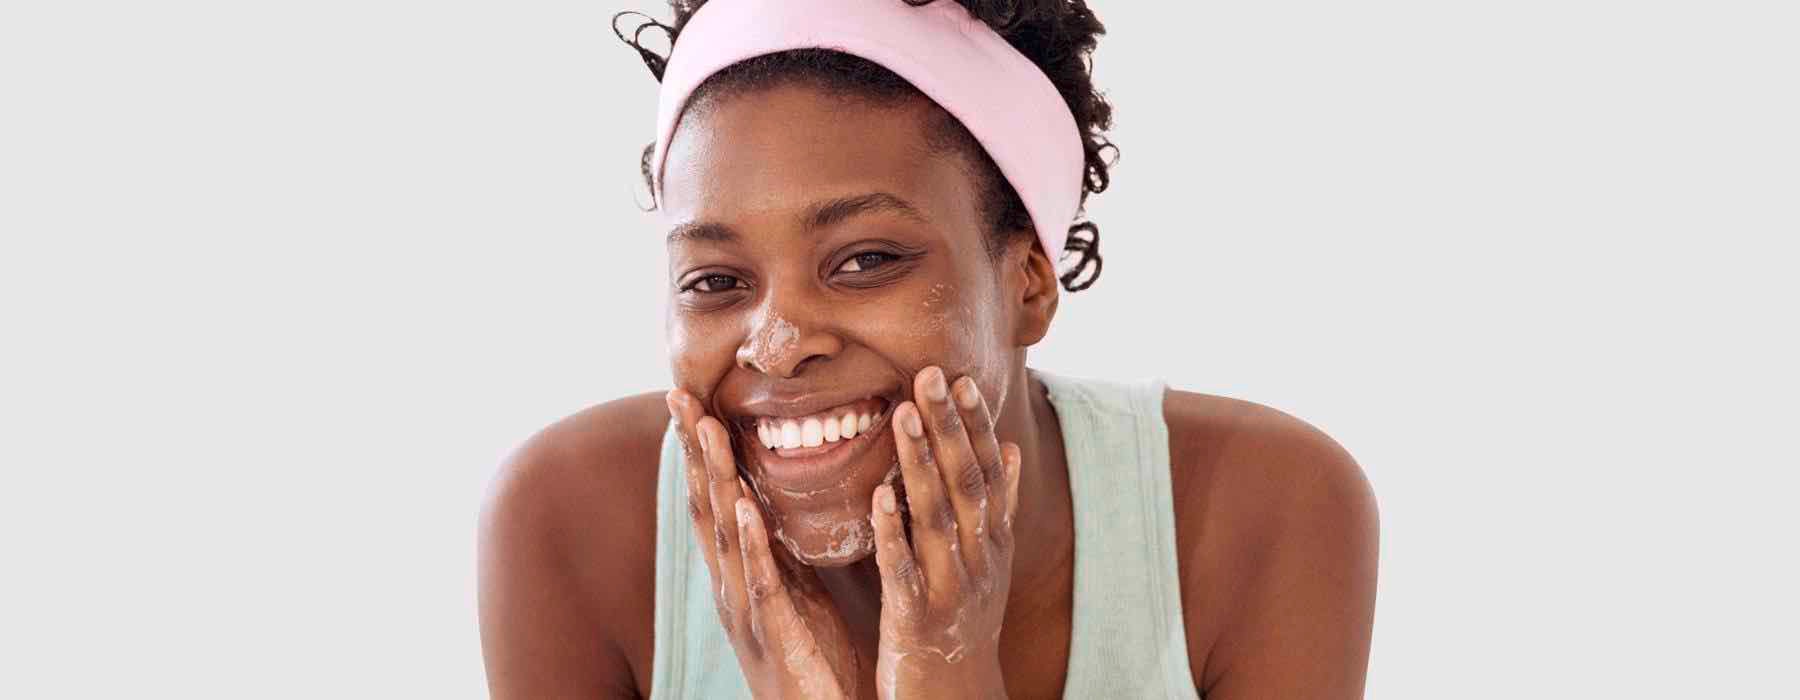 A woman smiling towards the camera and cleansing her face